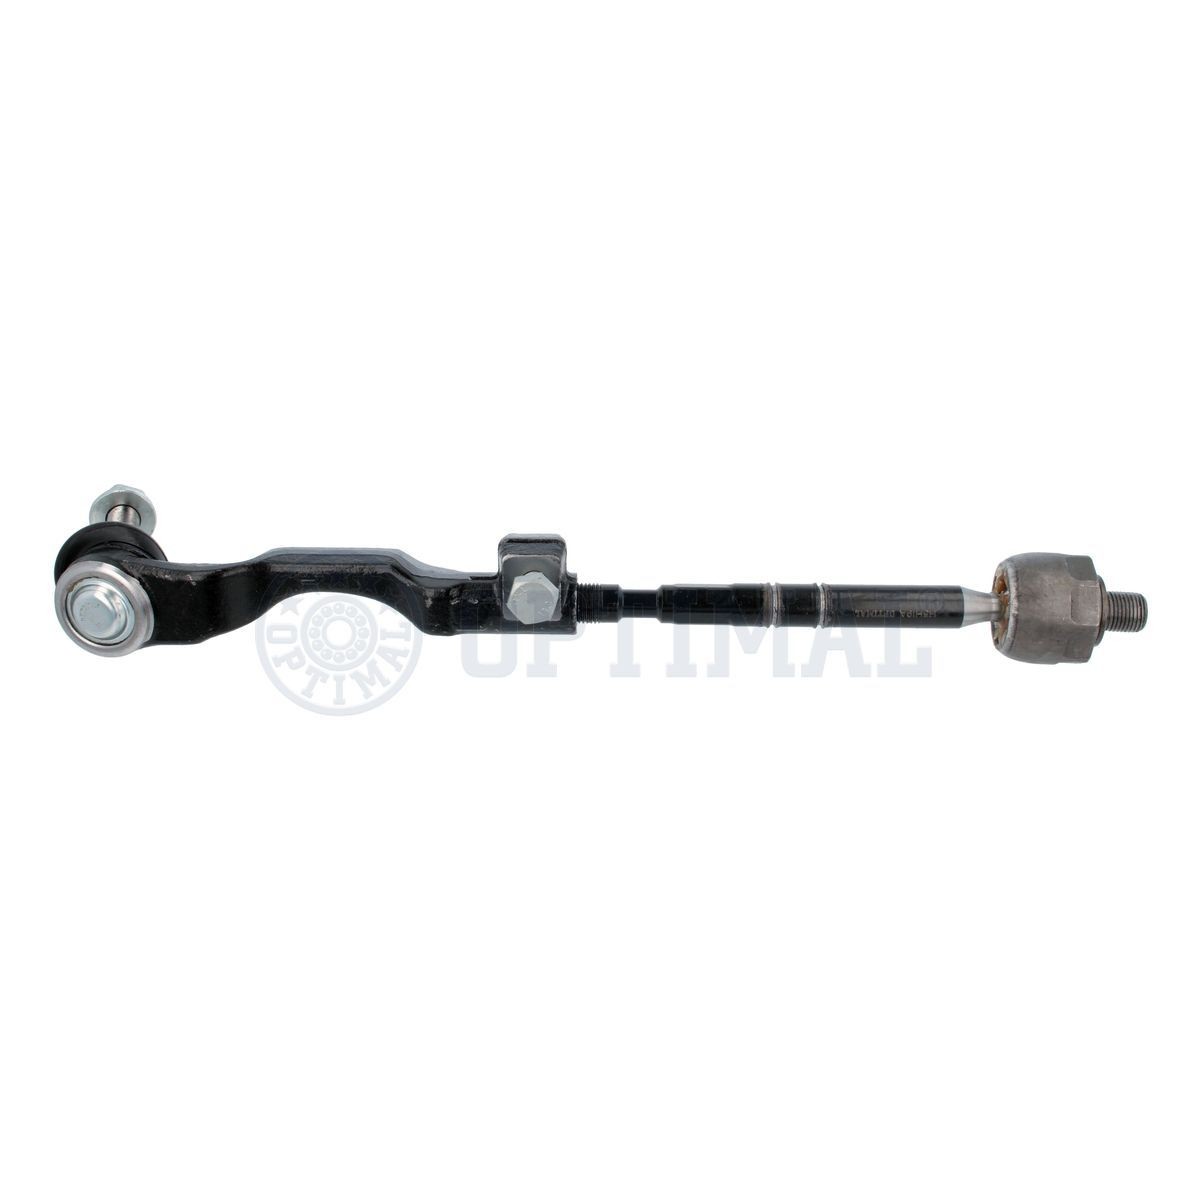 OPTIMAL Steering bar G0-2068 for BMW X5, X7, X6